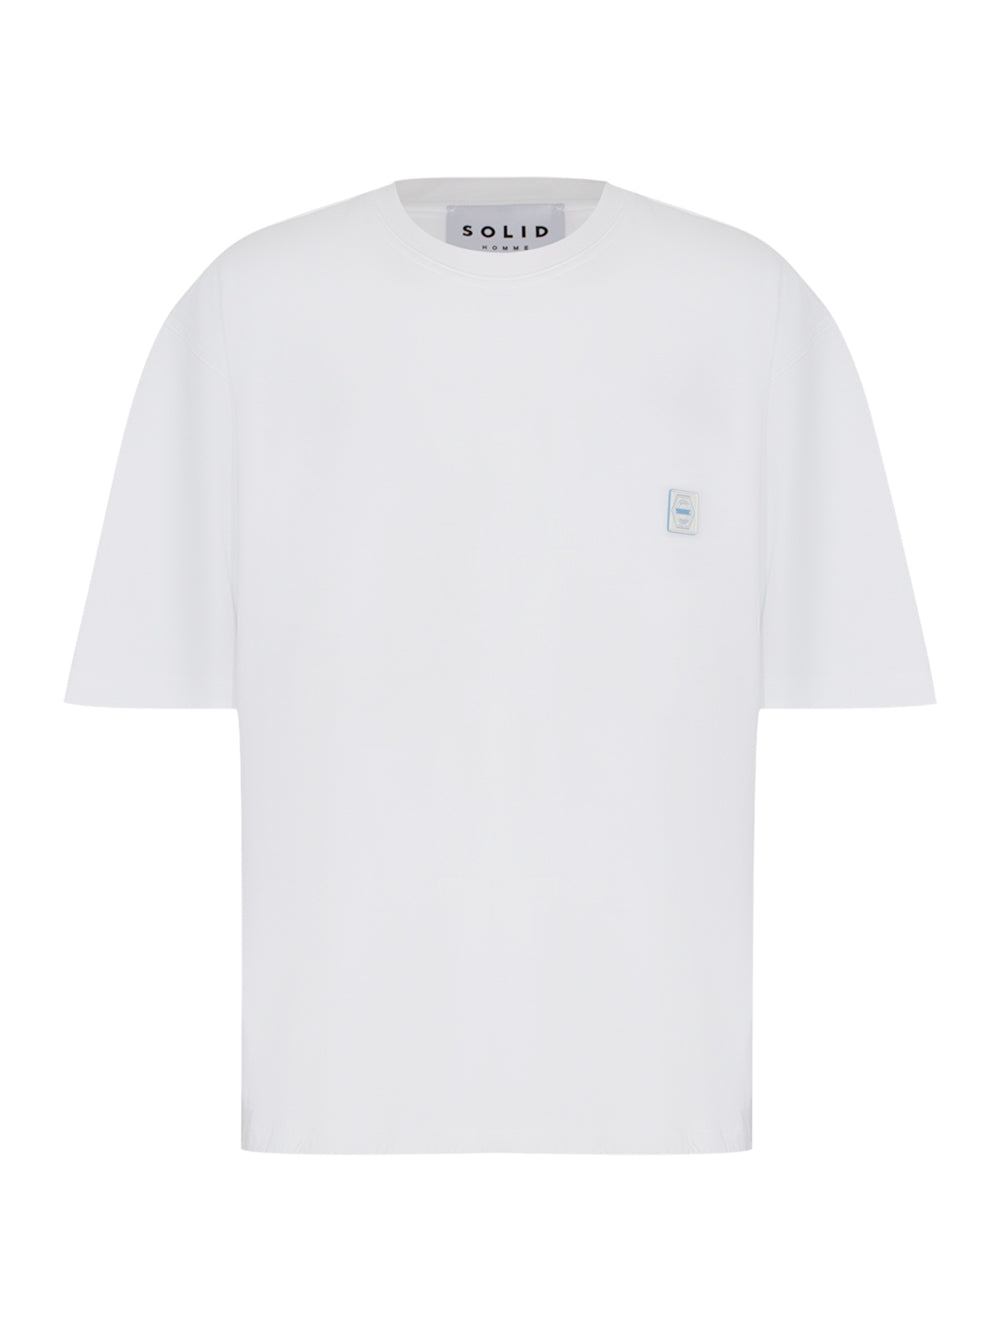 Embroidered T-Shirt (White)